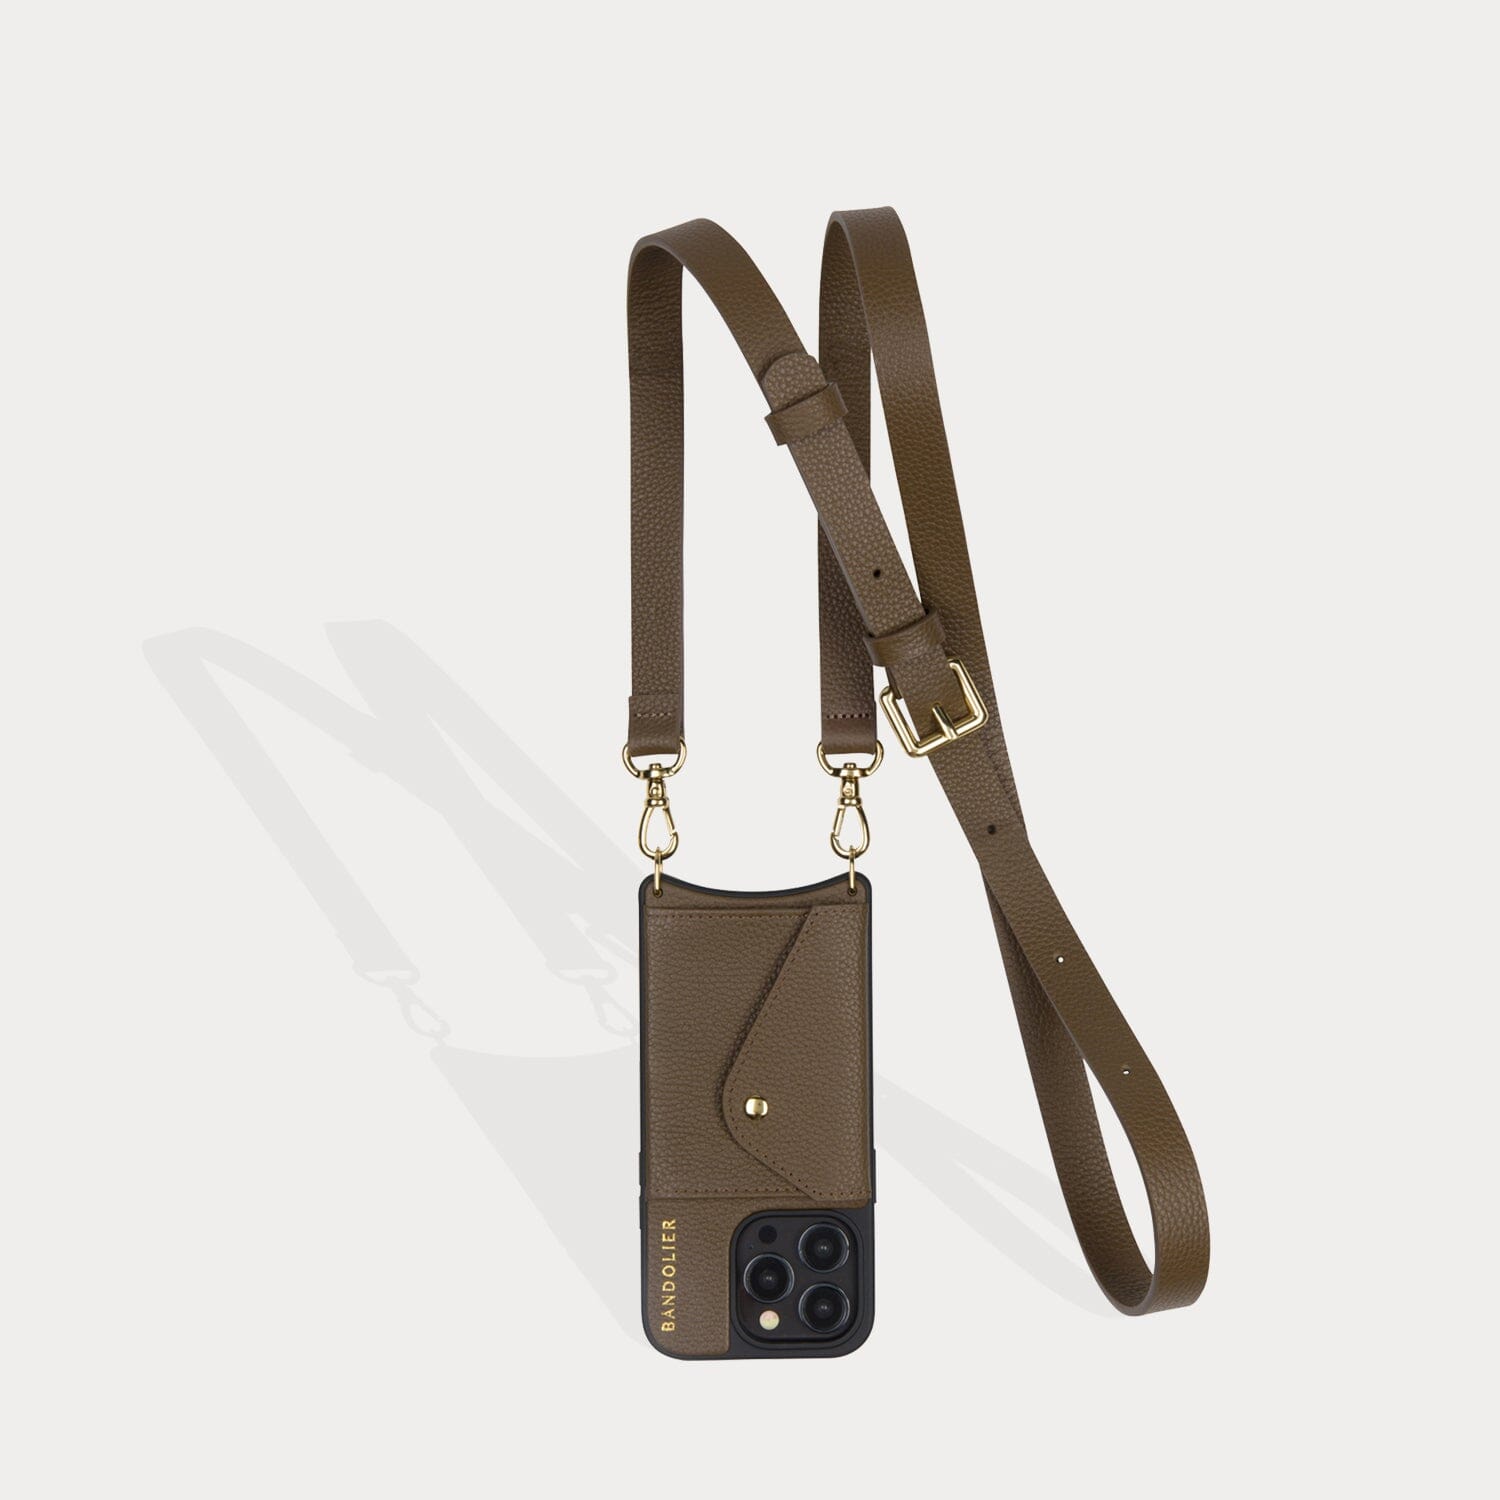 Hailey Expanded Set - Forest Brown/Gold pack Bandolier 